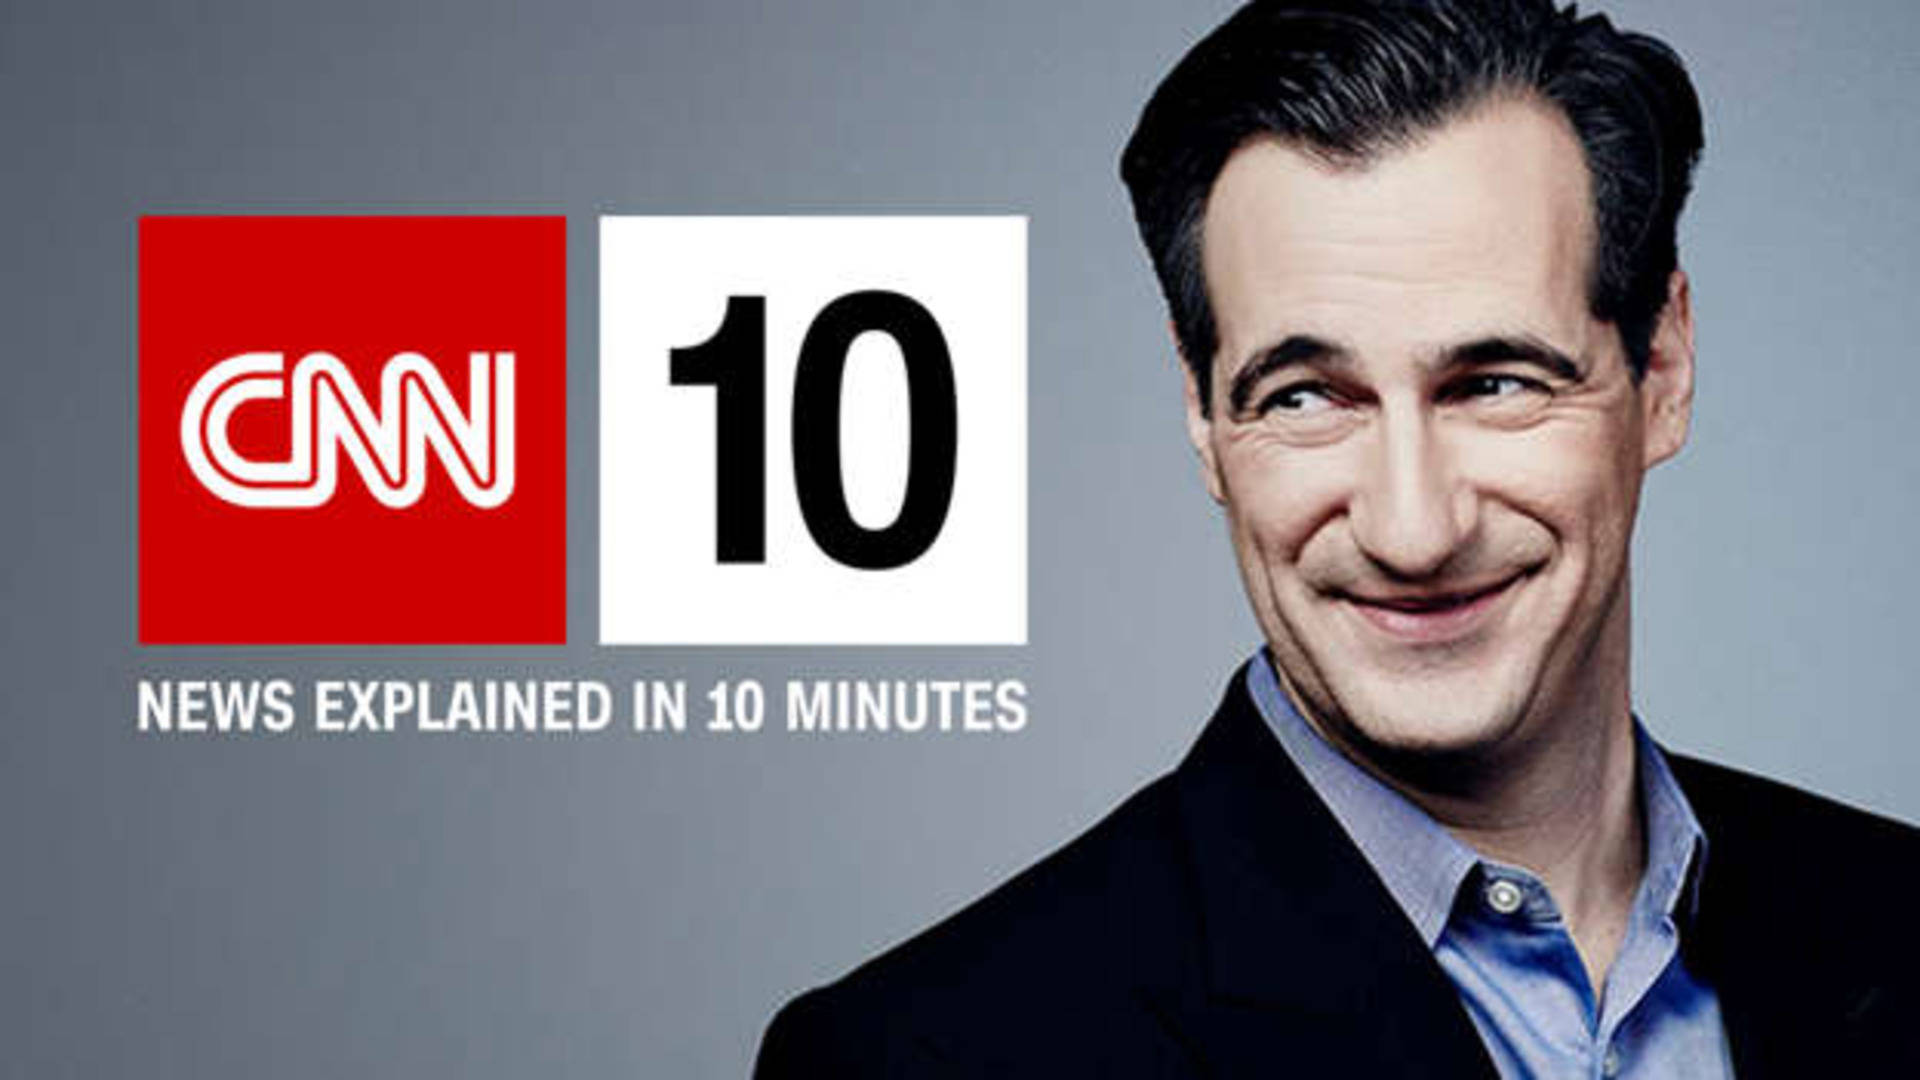 Cnn 10 News Explained In 10 Minutes Wallpaper